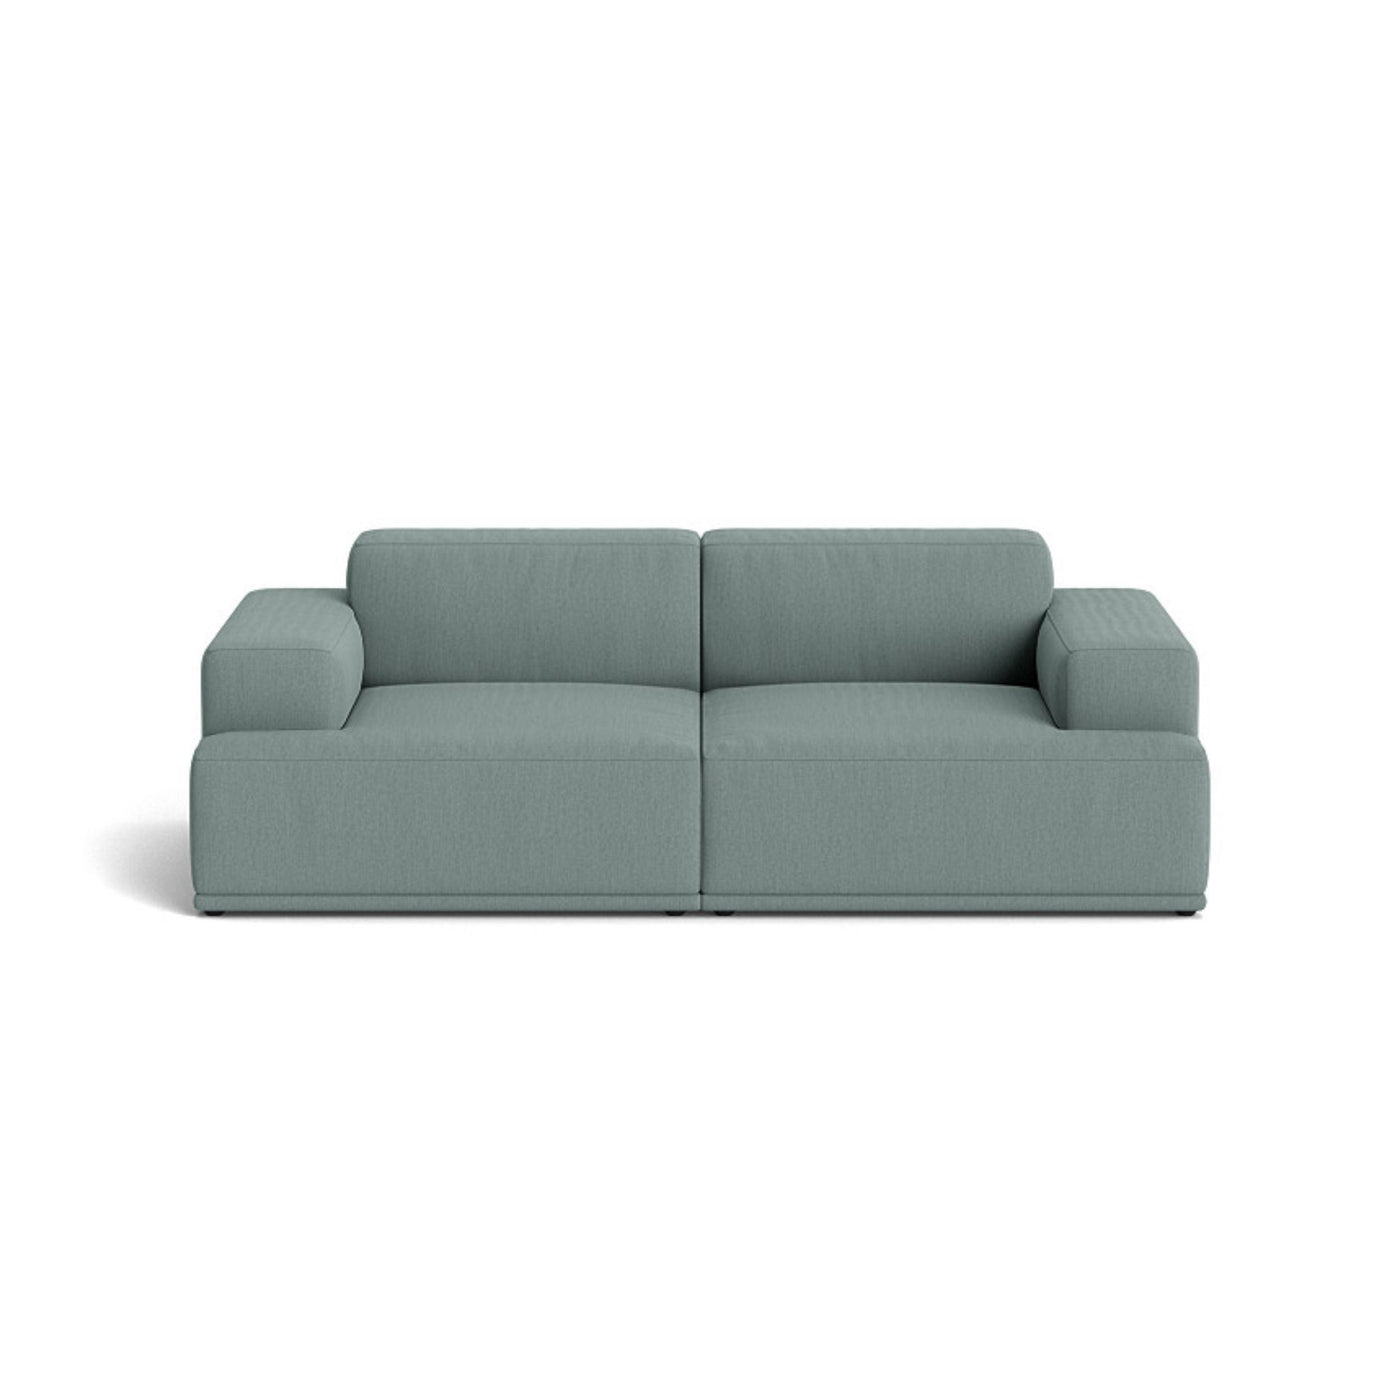 Muuto Connect Soft Modular 2 Seater Sofa, configuration 1. made-to-order from someday designs. #colour_re-wool-868